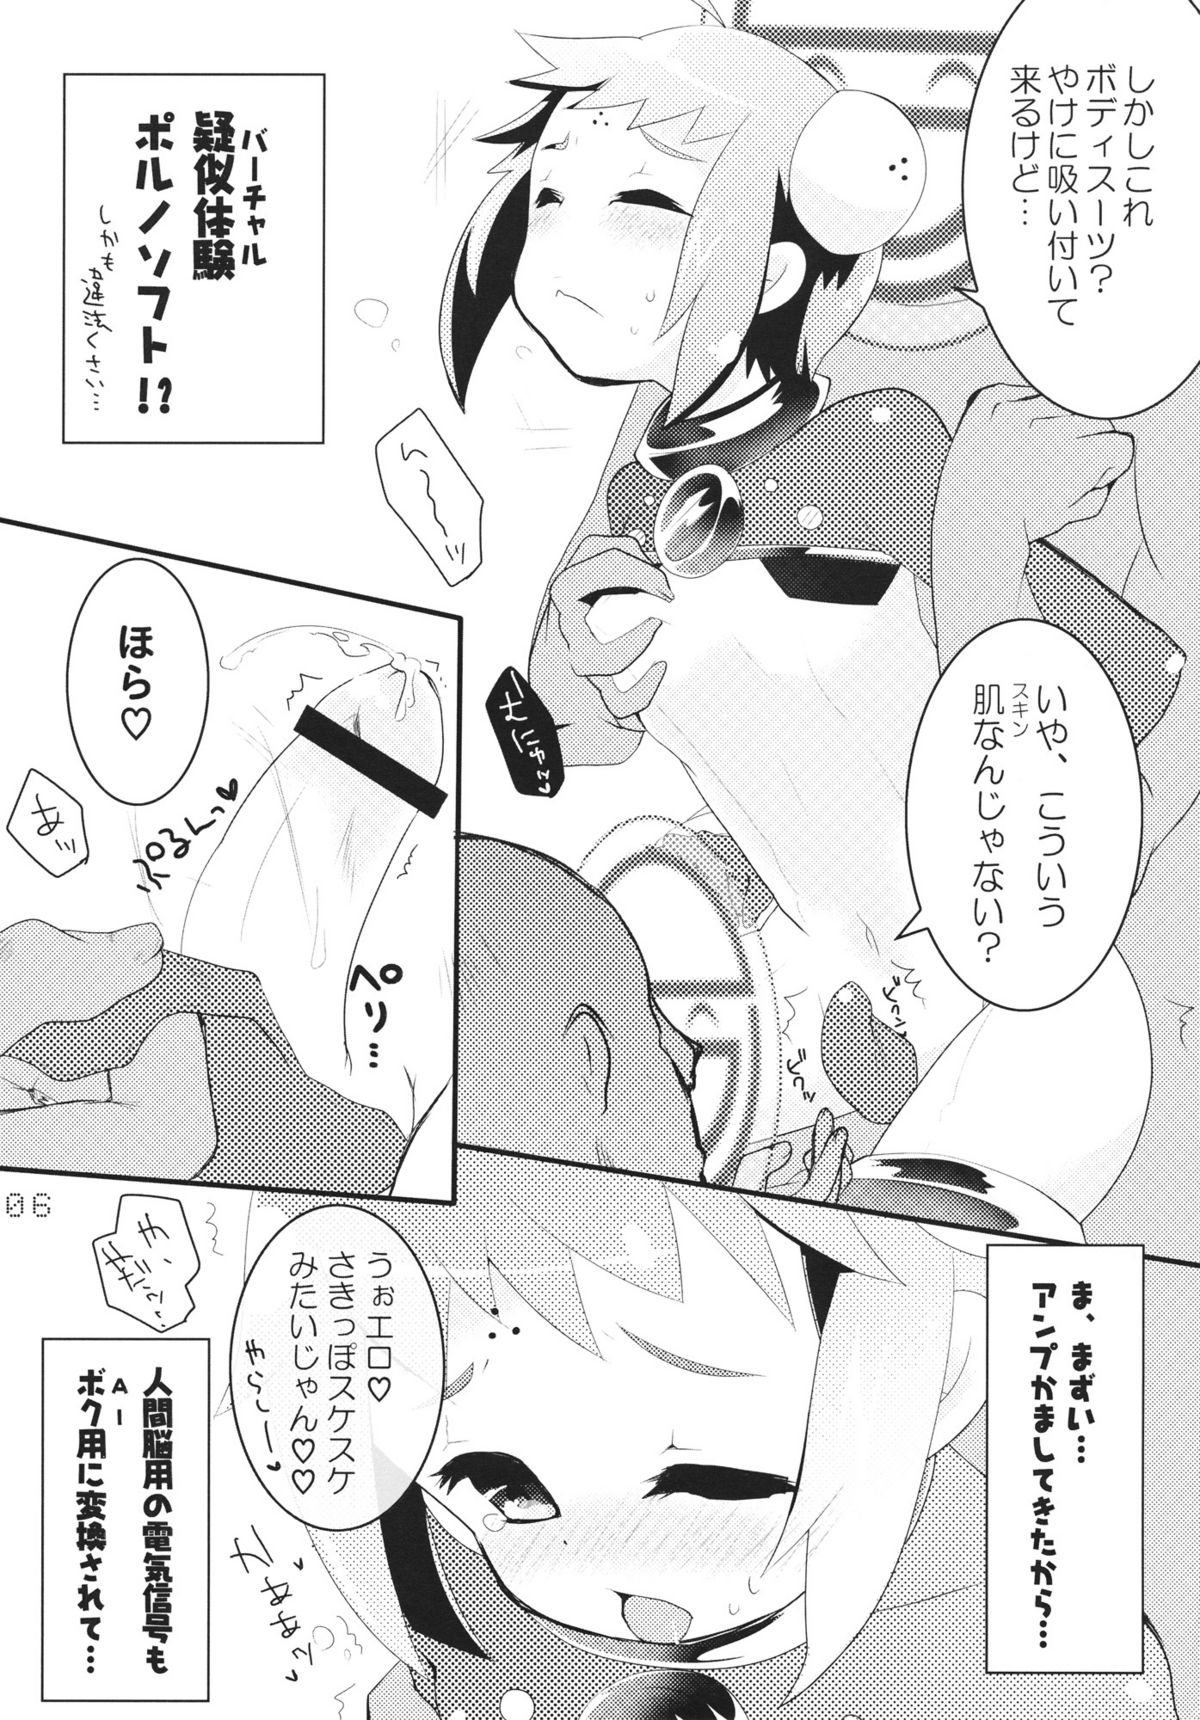 (Shota Scratch 15) [Tenkirin] VD (Ghost in the Shell) page 6 full